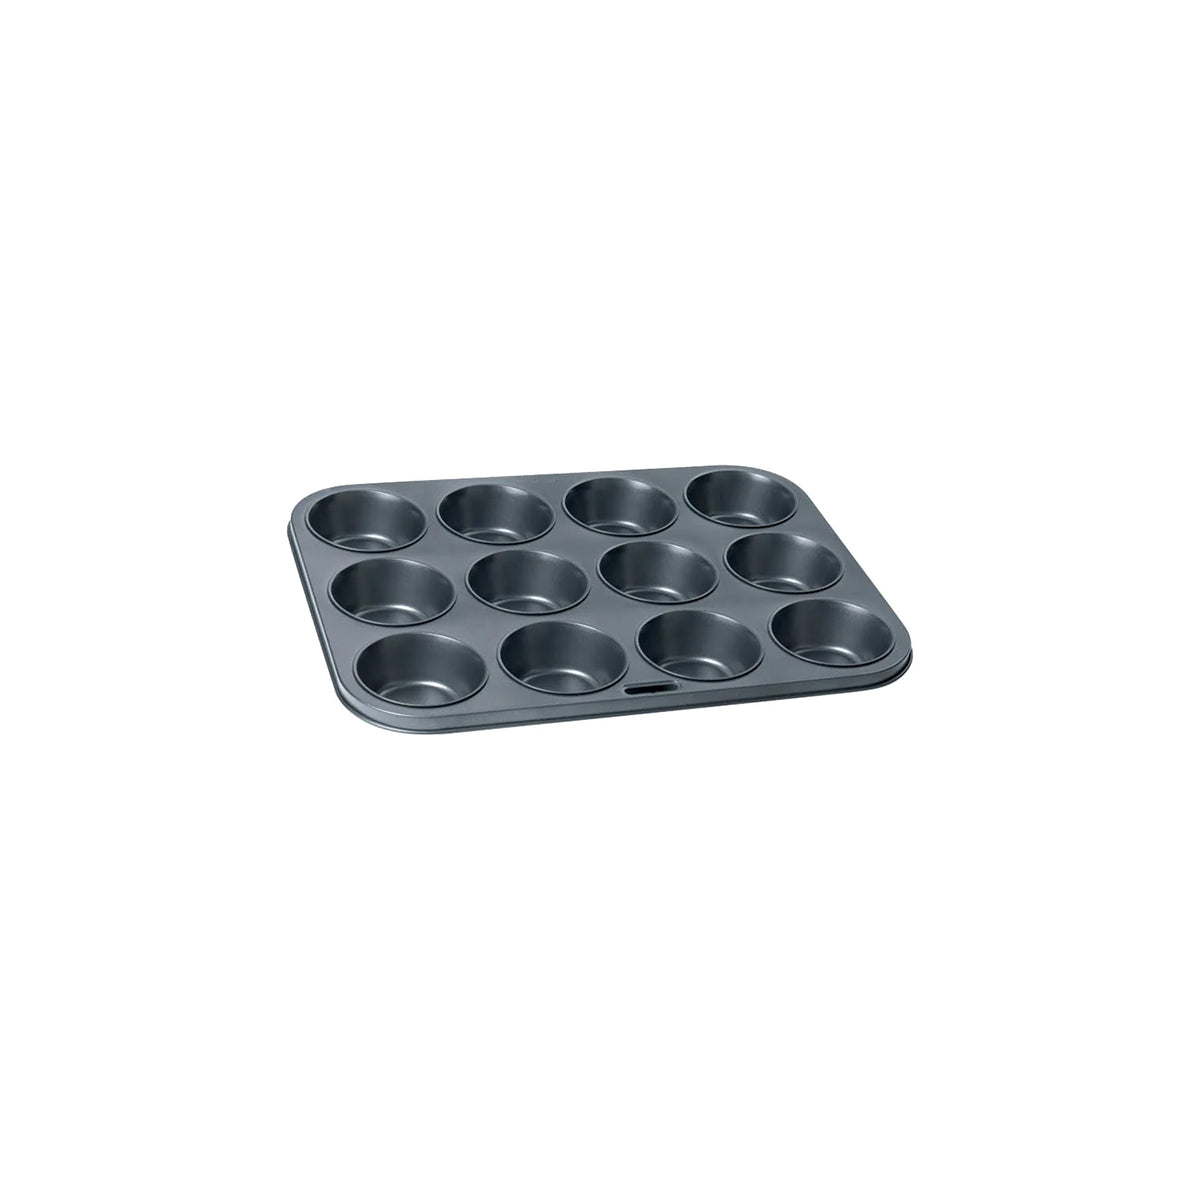 WLT9001MP Wiltshire Easybake Muffin Pan 12 Cup Tomkin Australia Hospitality Supplies